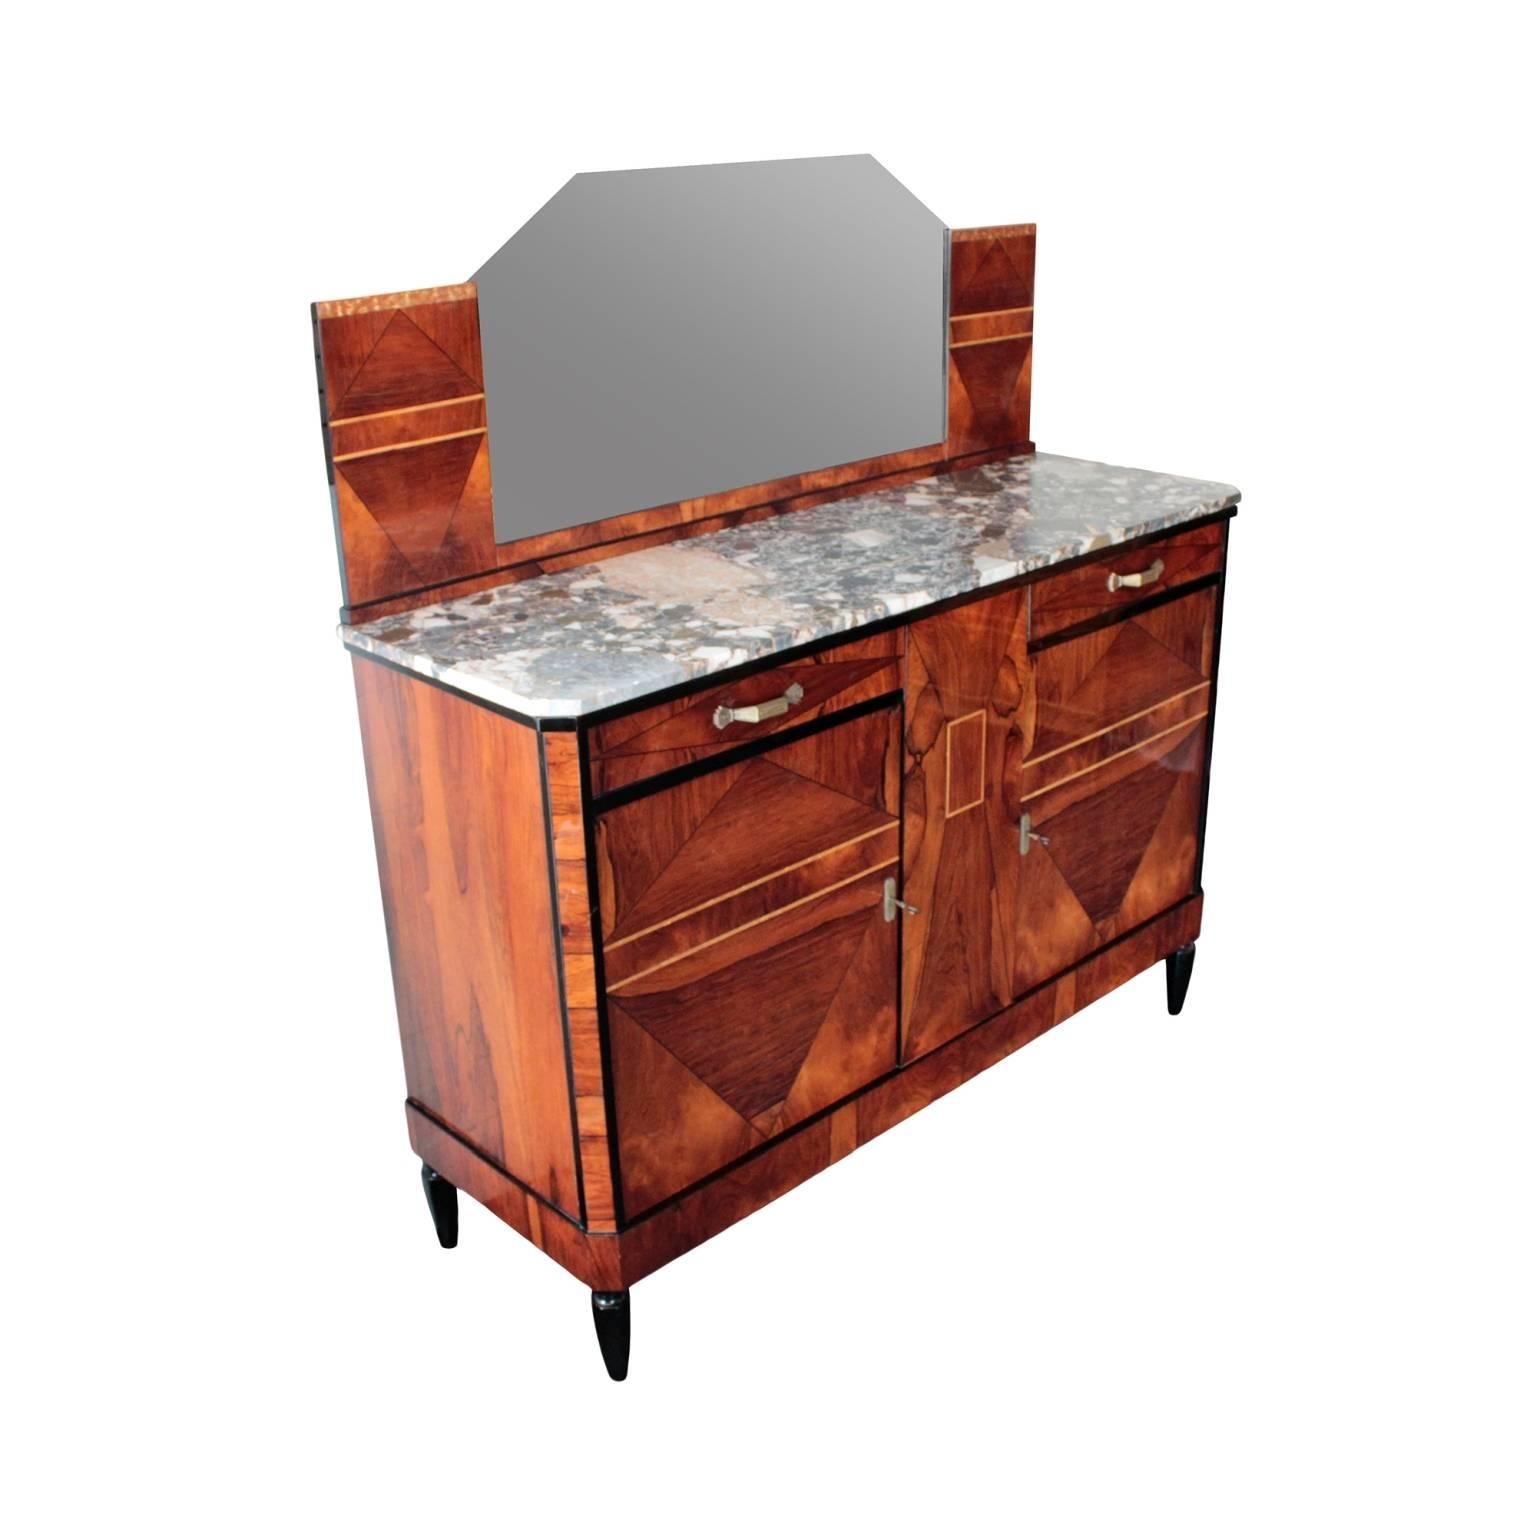 Well sized and striking server having a removable mirror with canted corners resting on a cabinet in book-matched rosewood with Italian marble top, pair of drawers and pair of doors enclosing full width single shelf. The whole parcel ebonized and